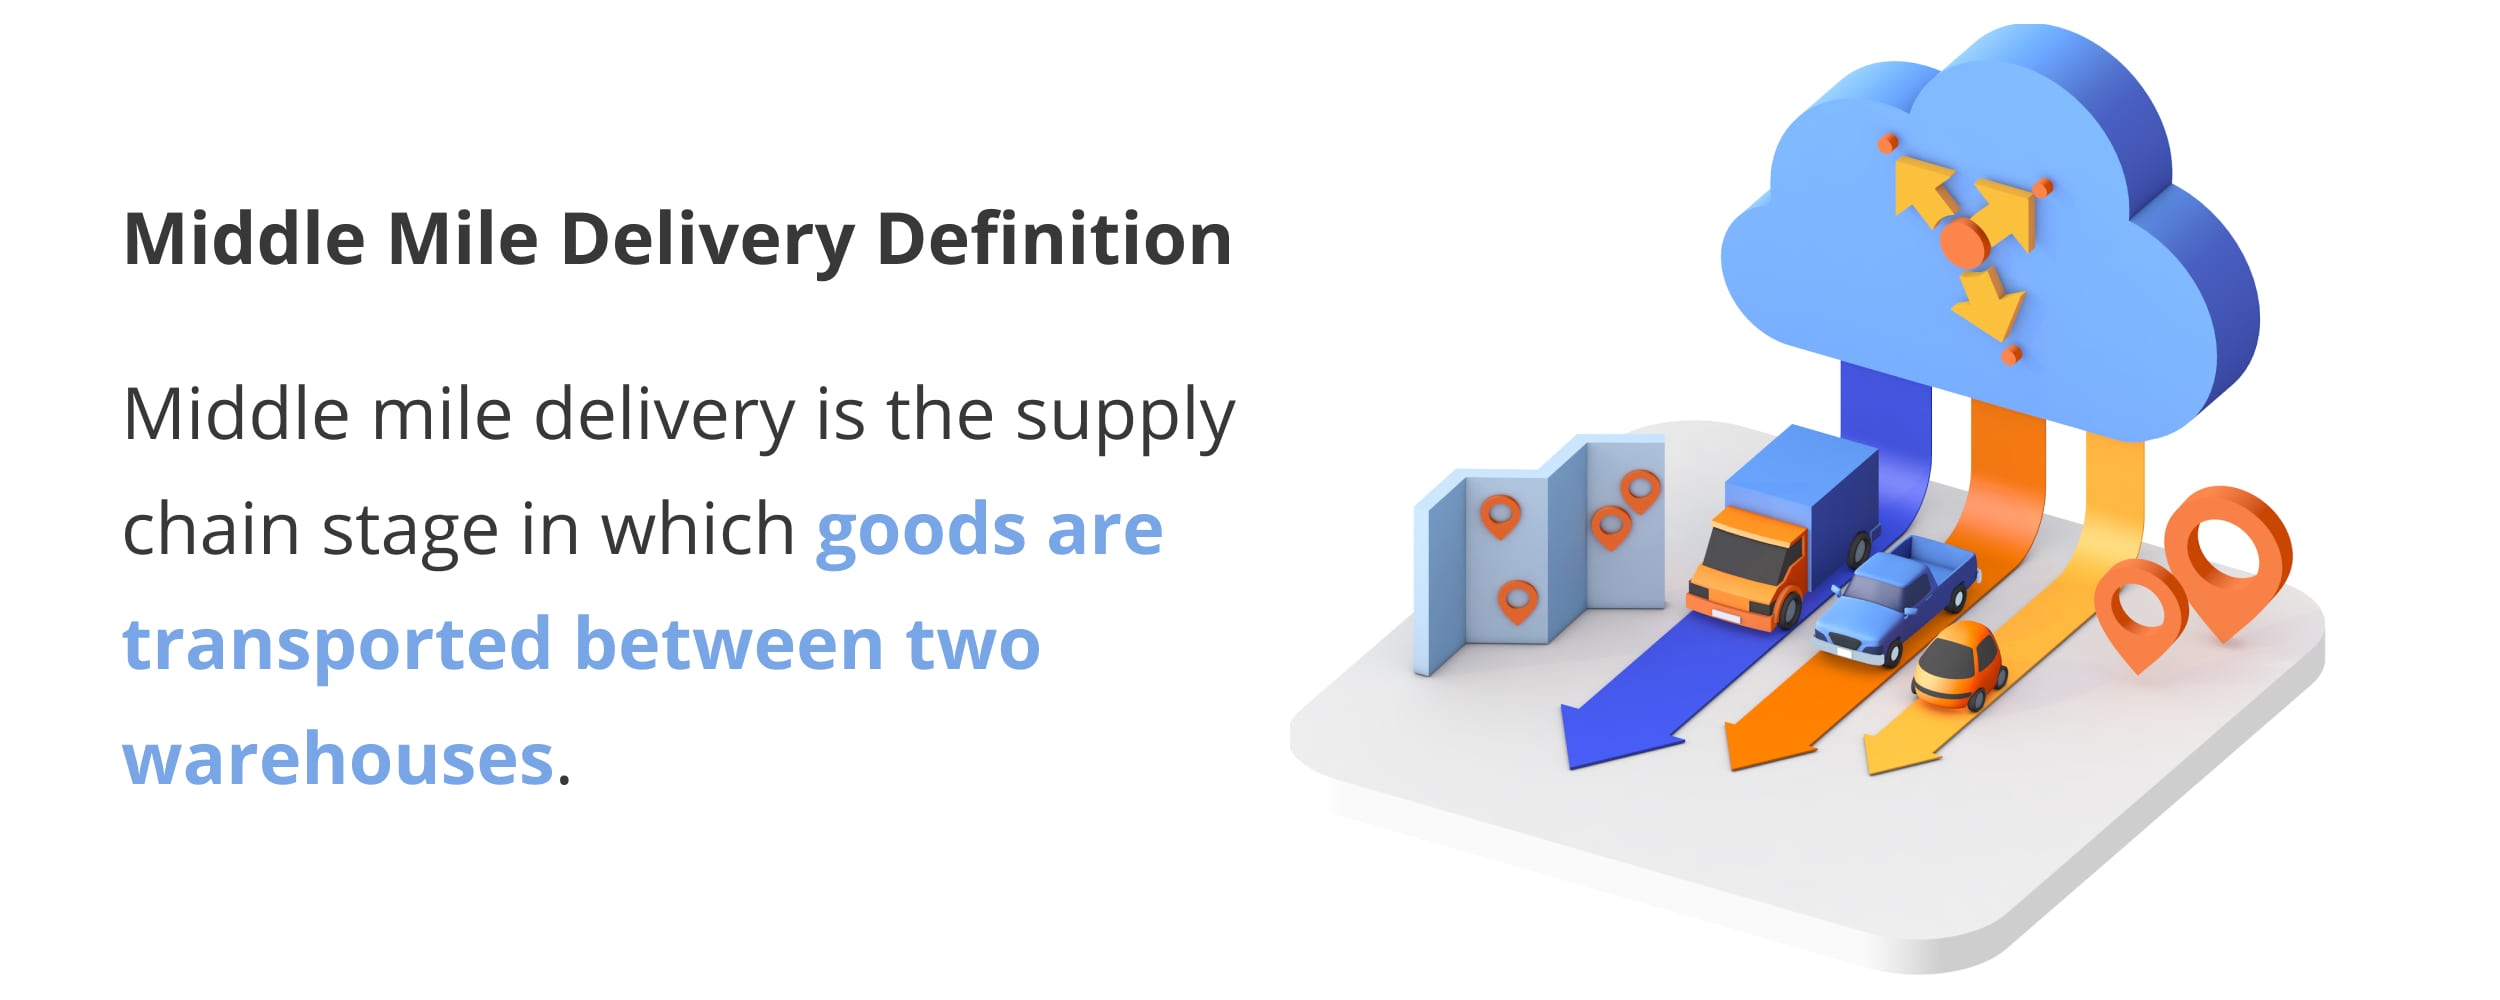 The middle mile delivery definition explained.